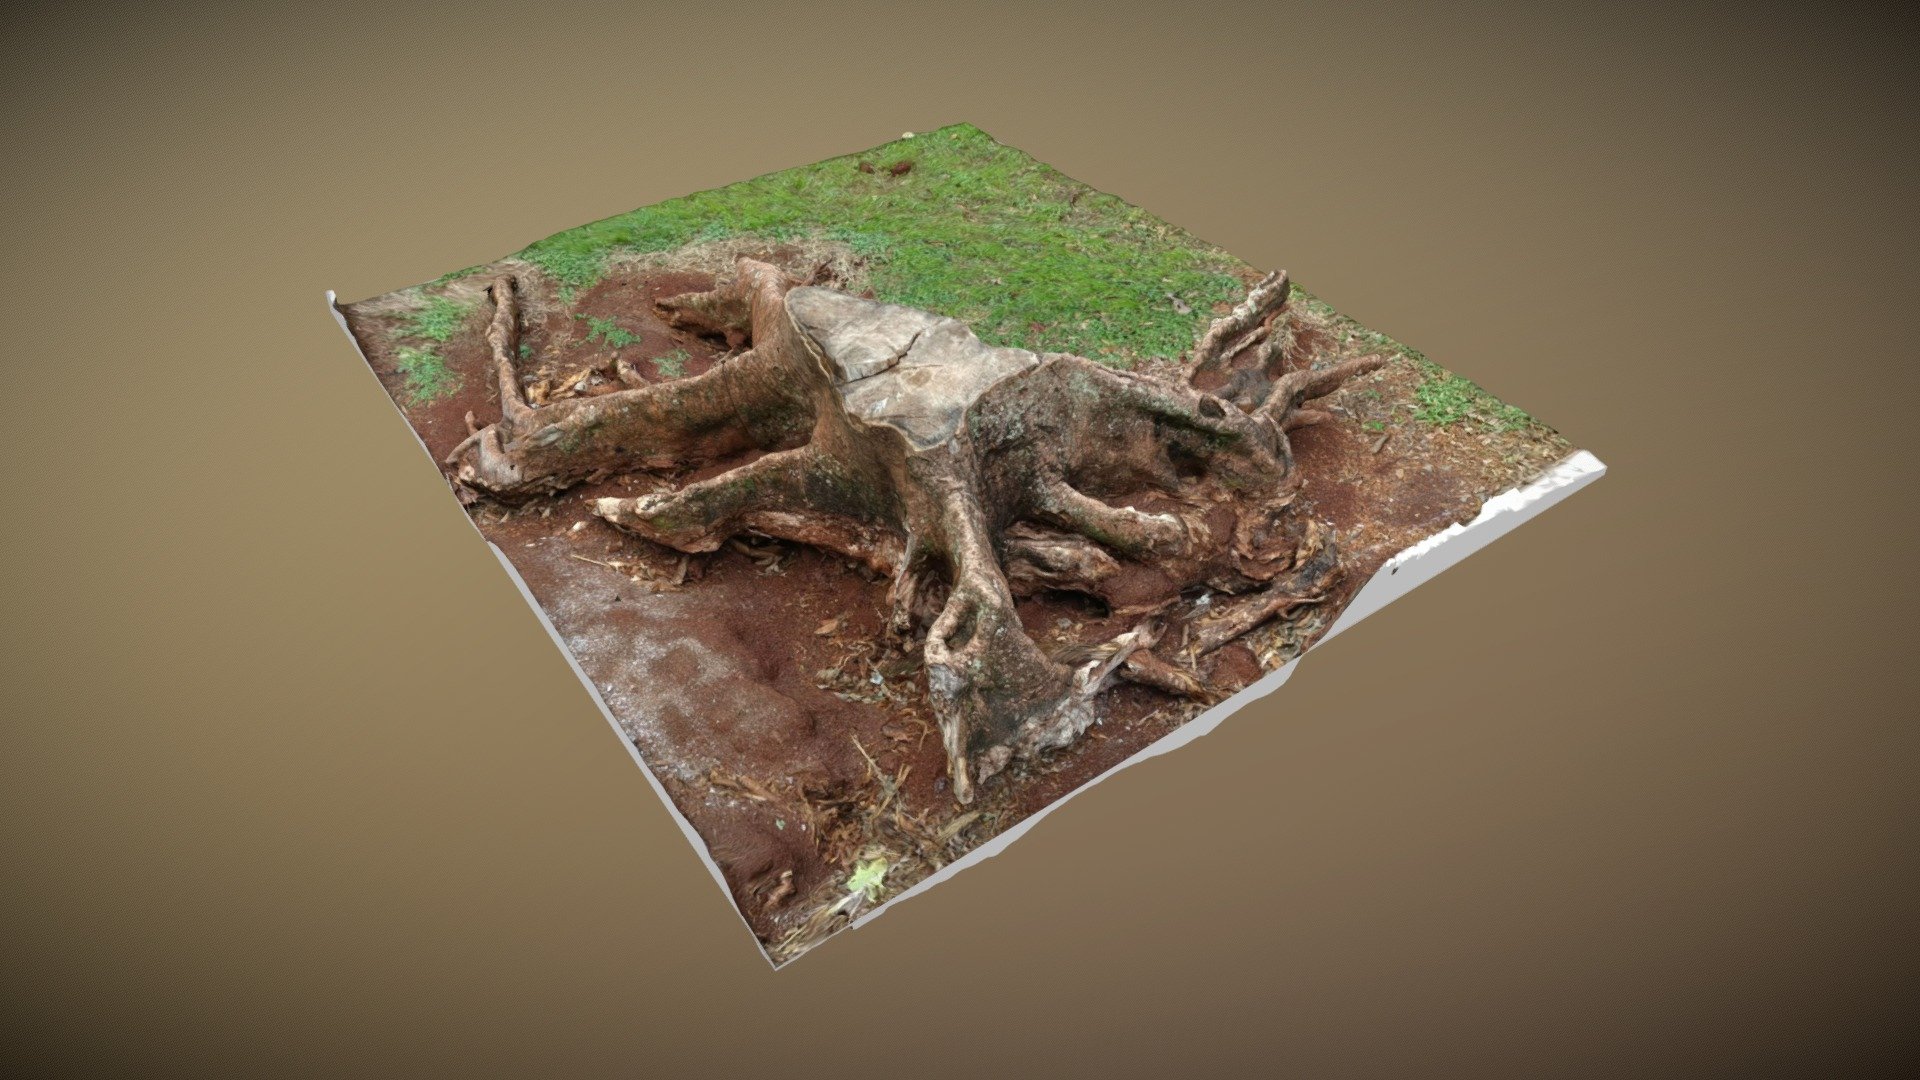 Meshroom Uhd Video Photogrammetry Test Download Free 3d Model By